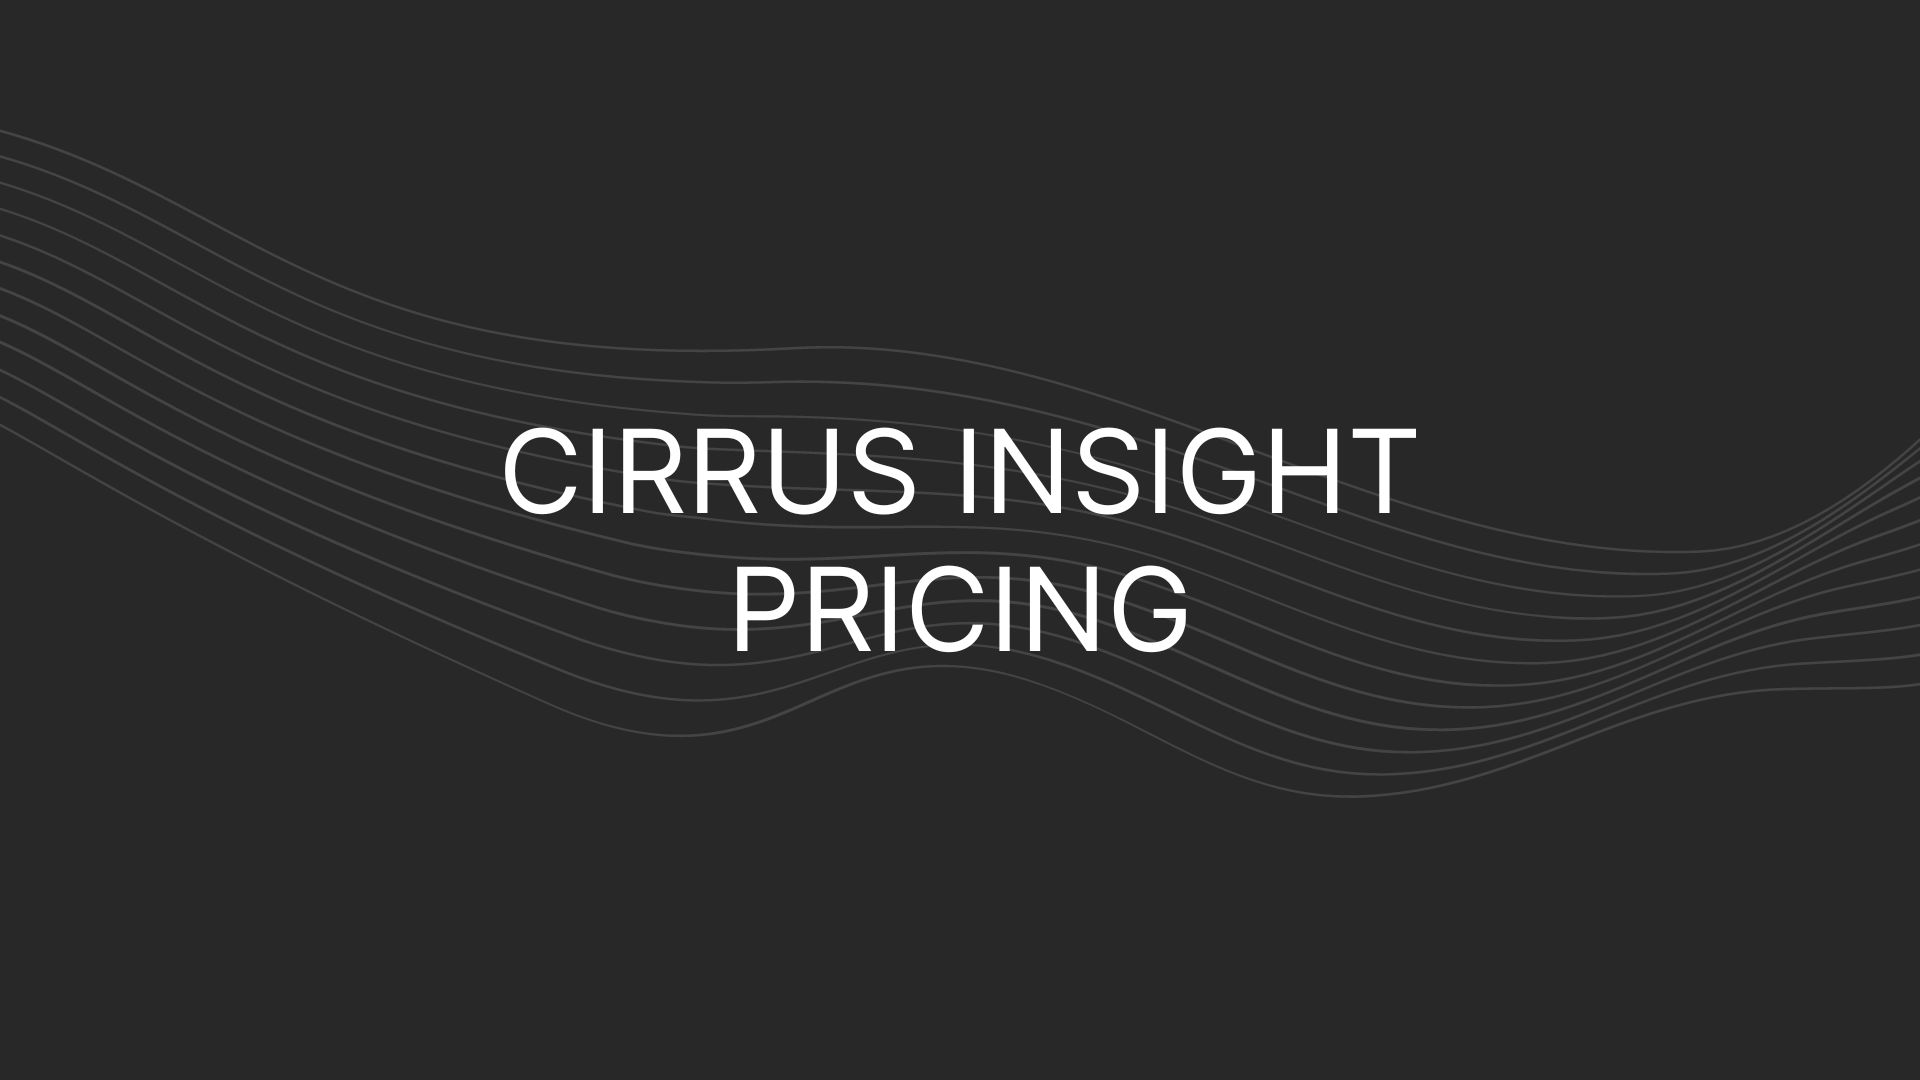 Cirrus Insight Pricing – Actual Prices for All Plans Including Expert